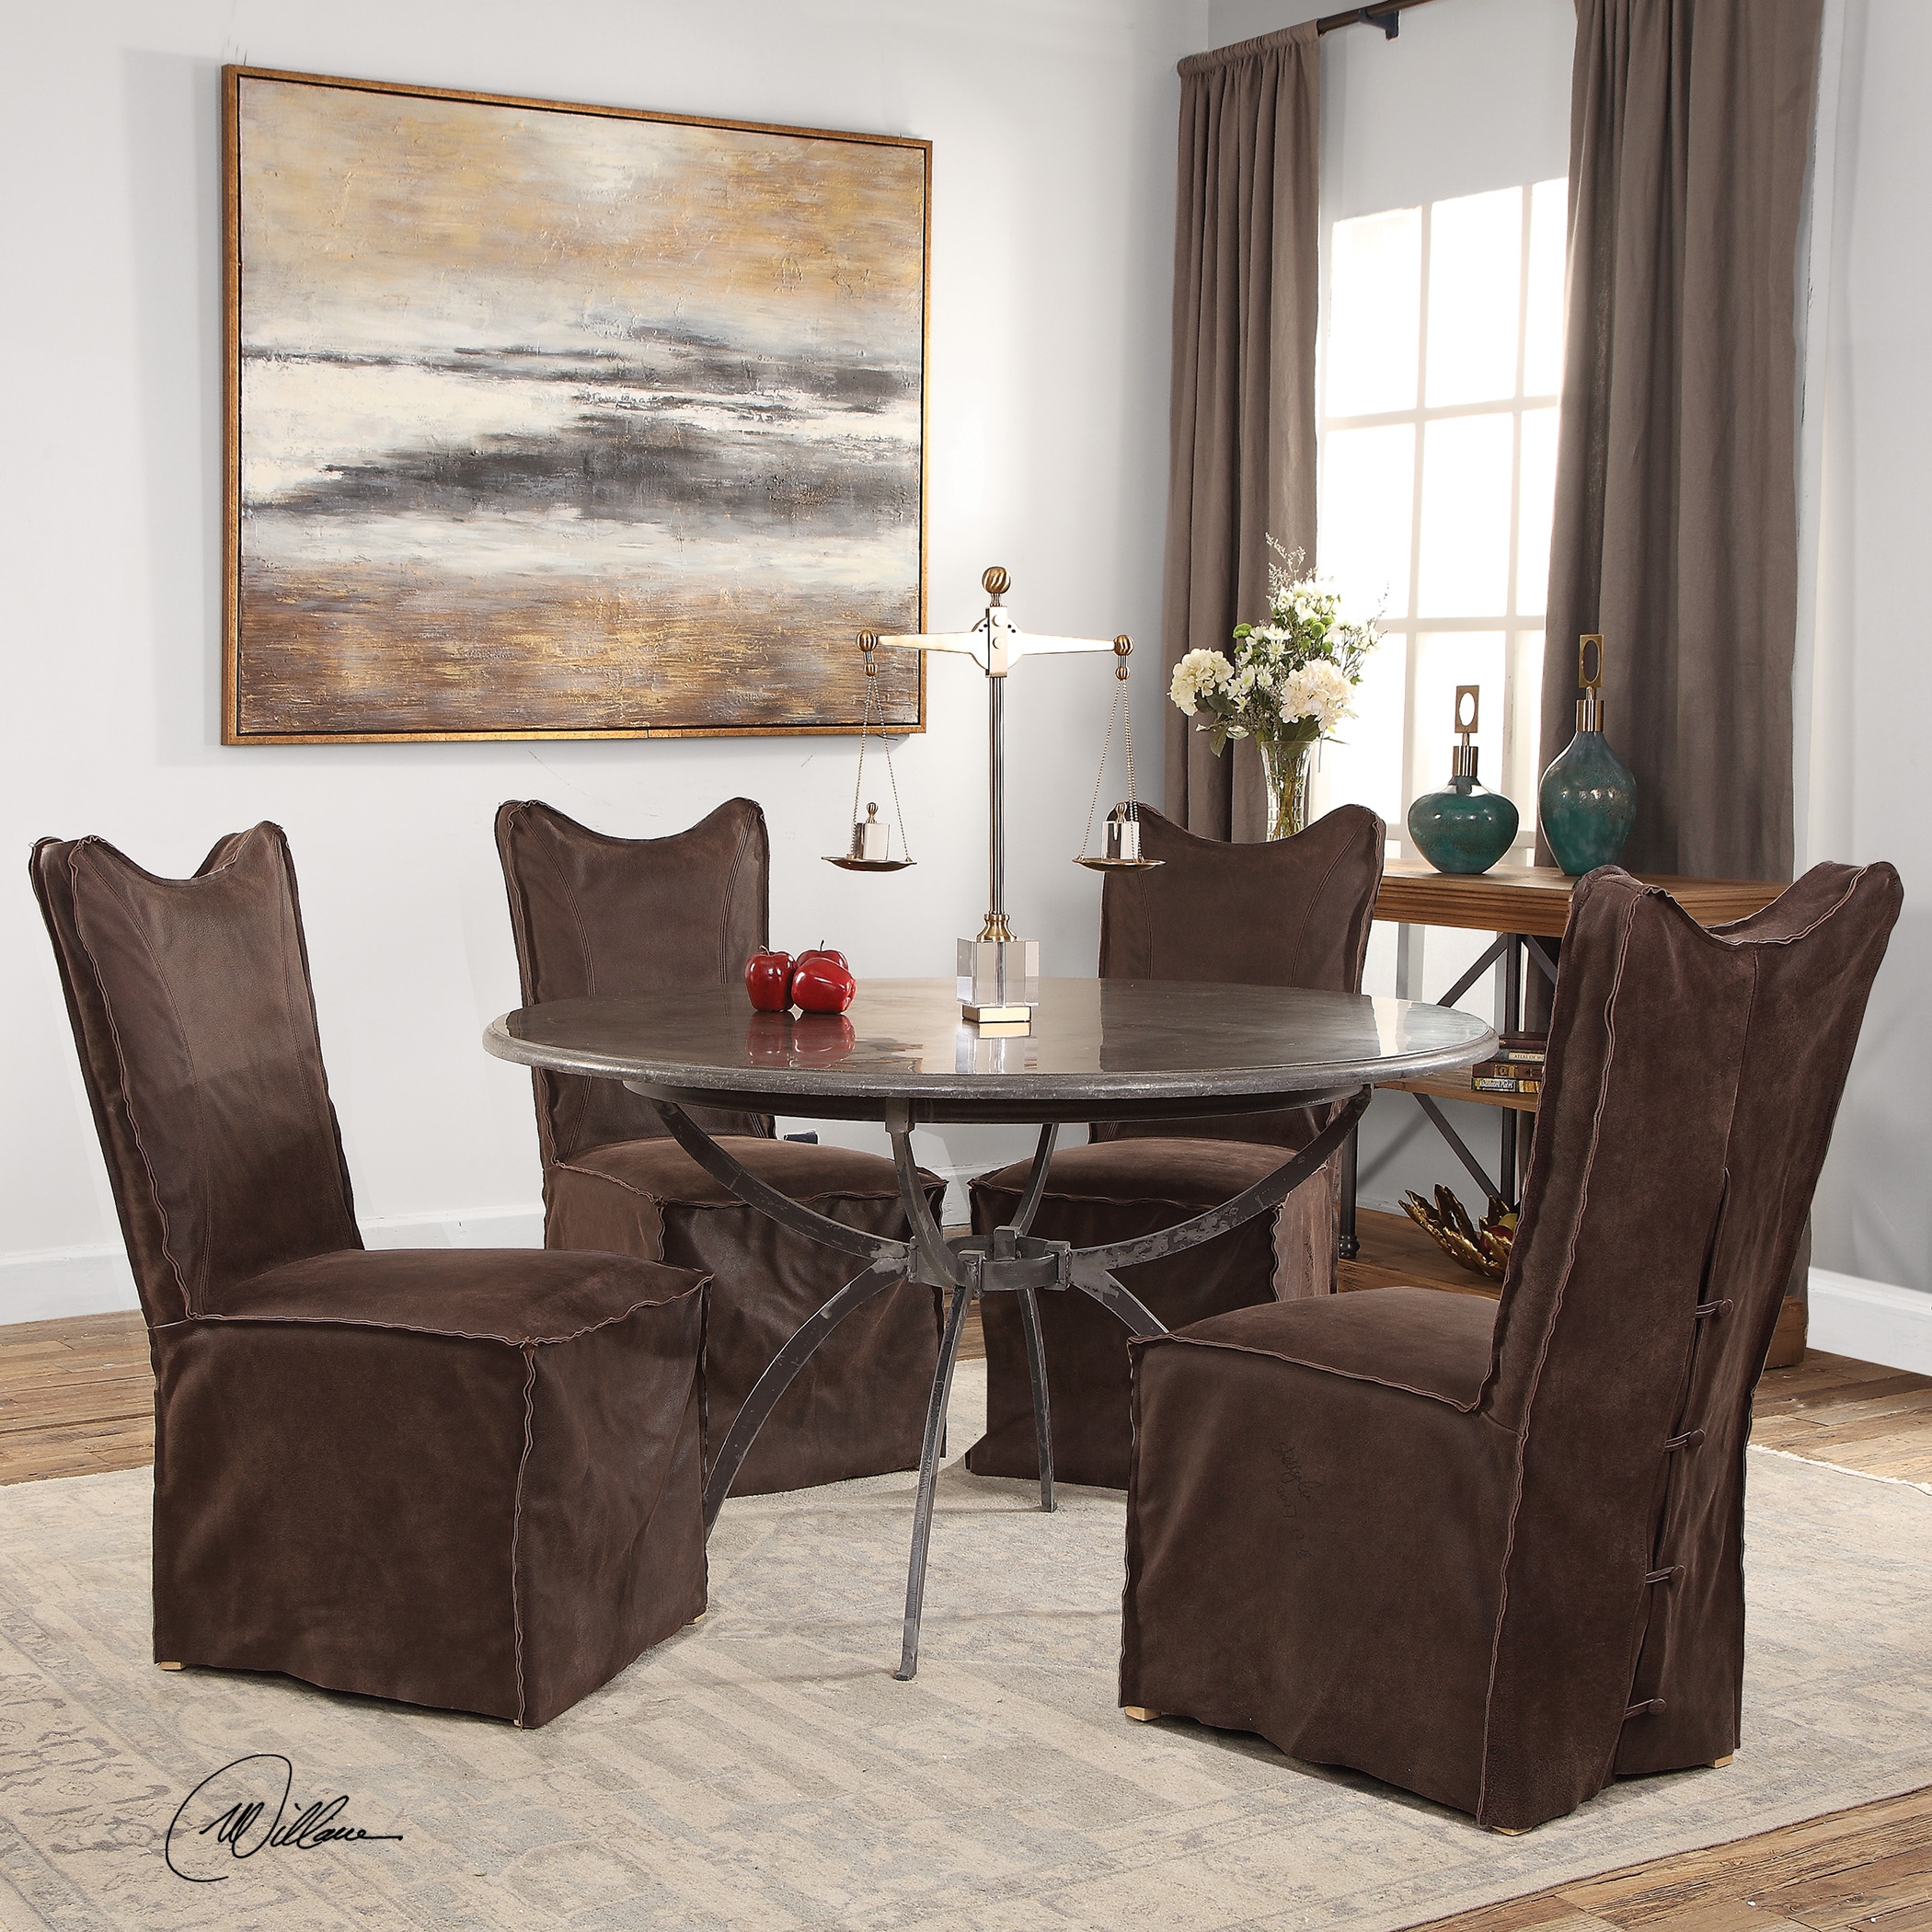 Delroy Armless Chairs, Chocolate, Set Of 2 - Image 0